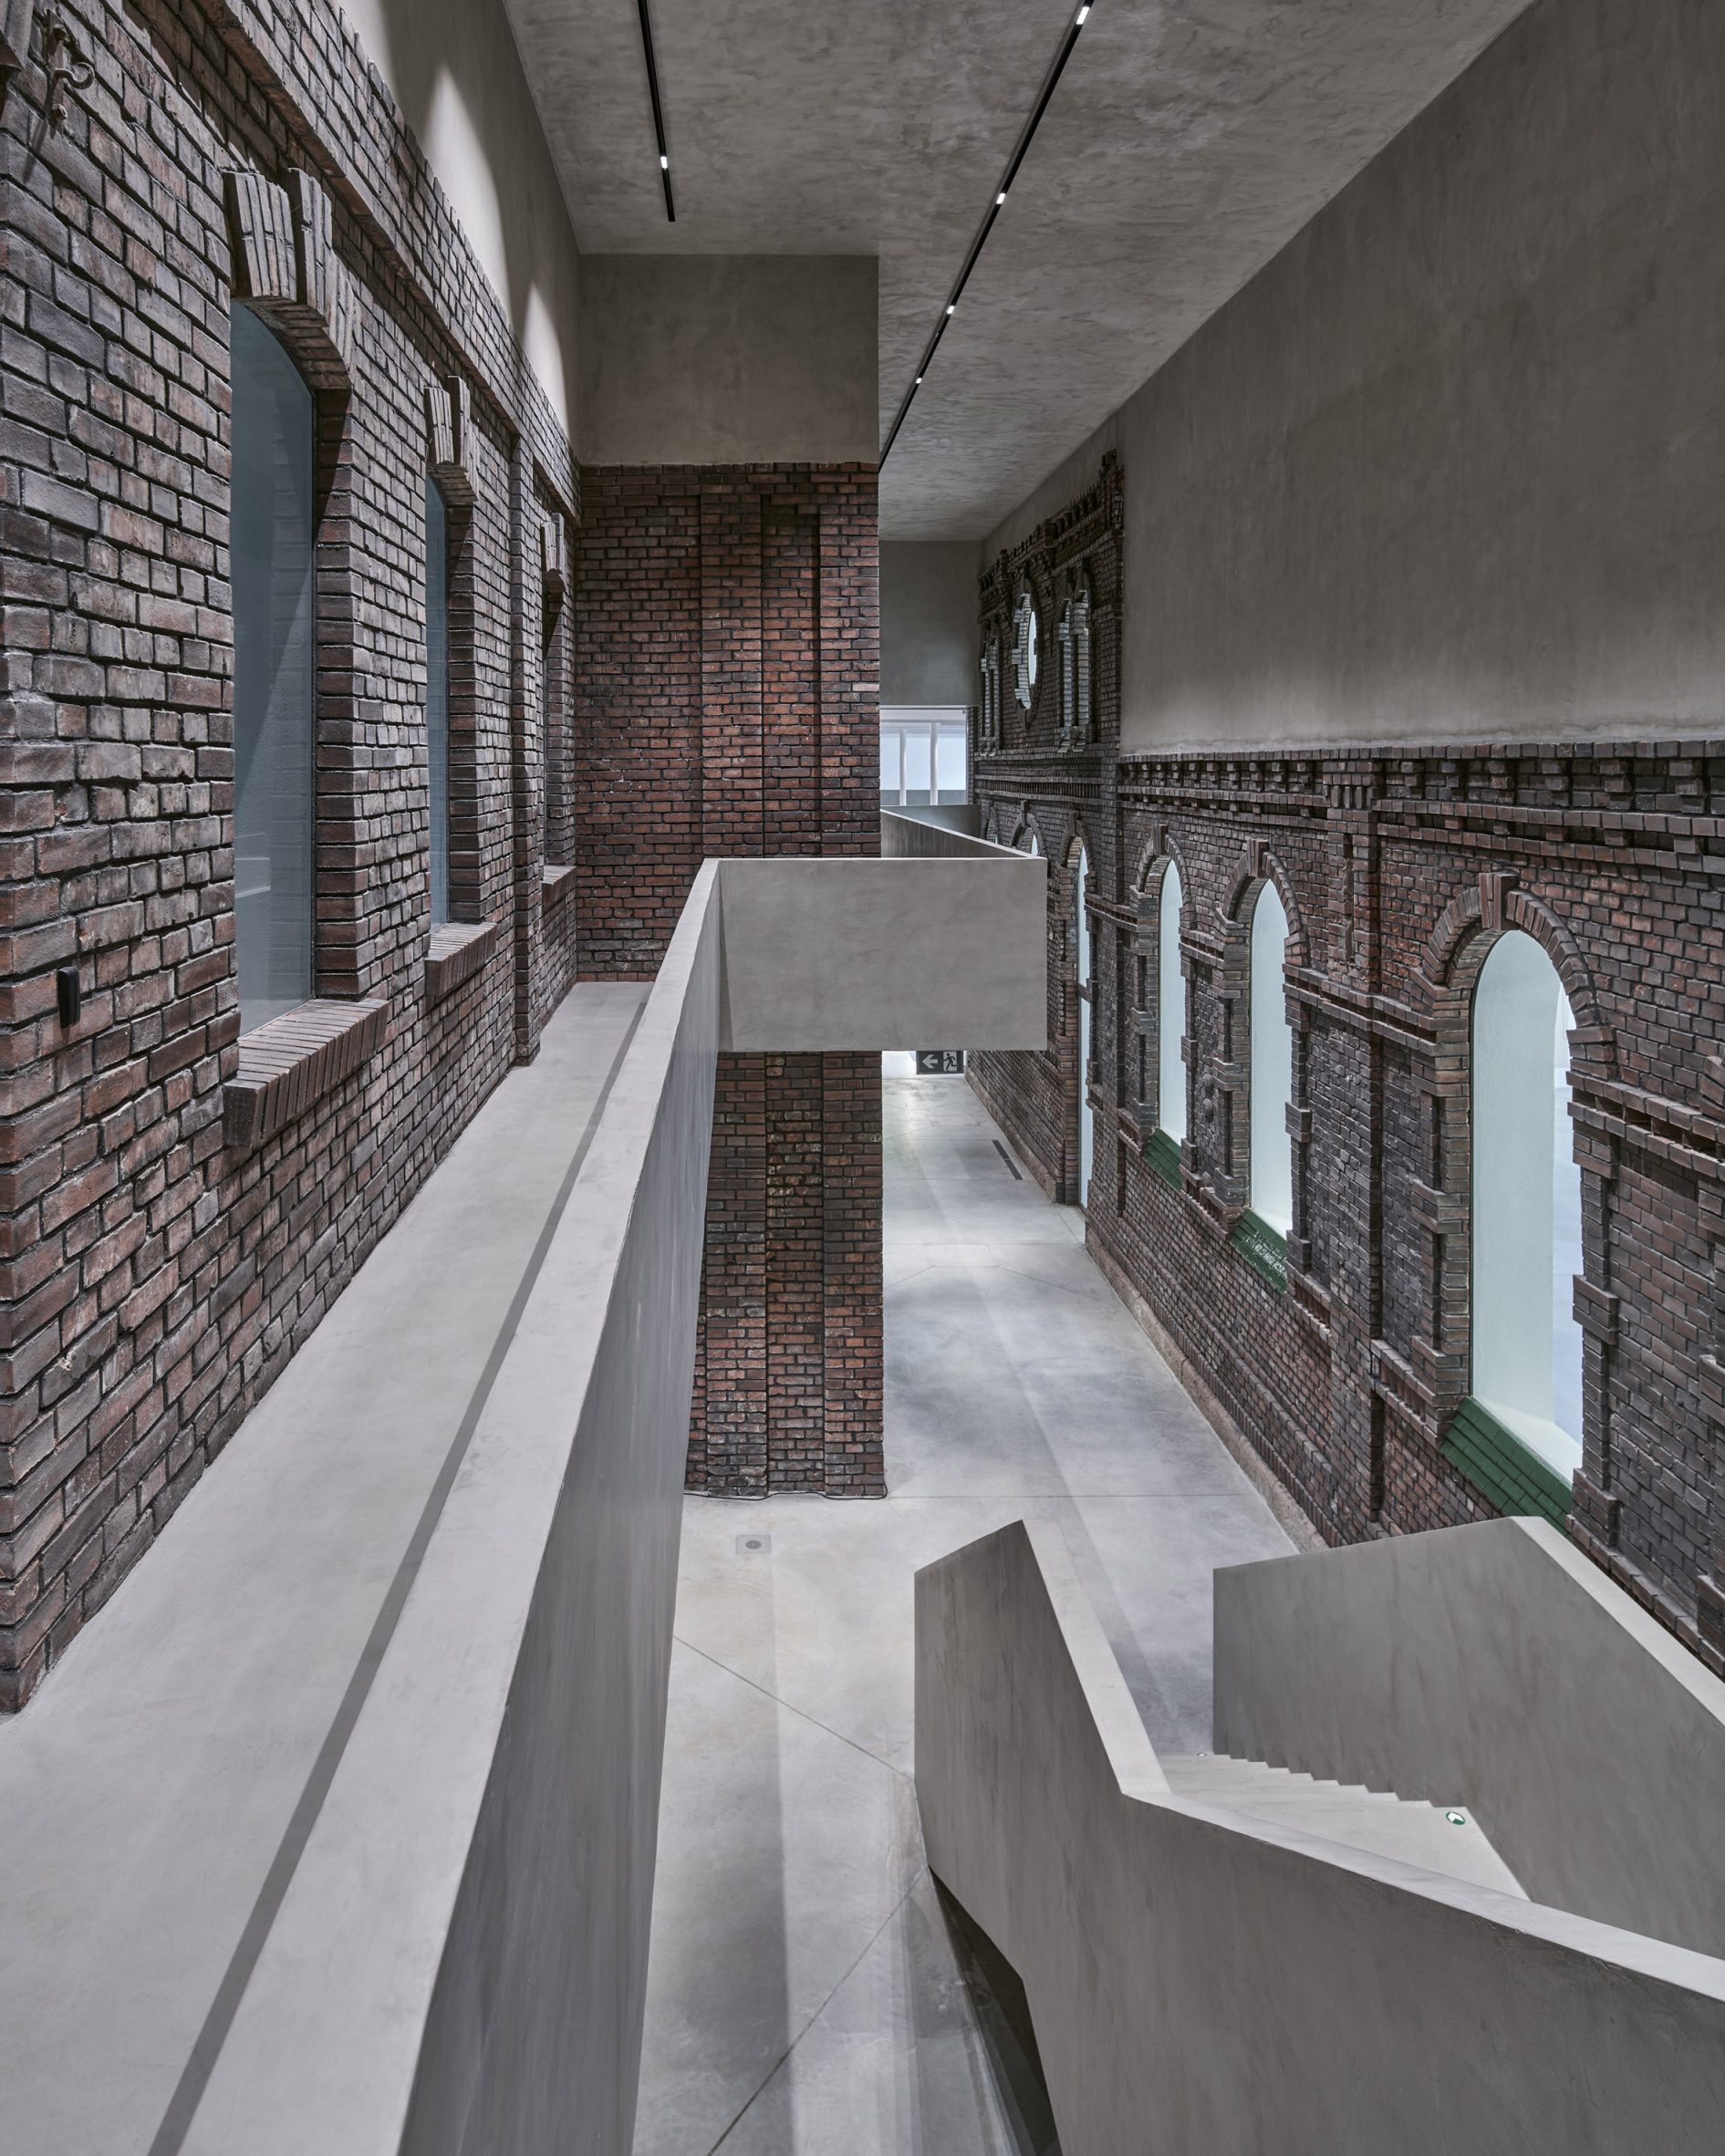 Interior of the a former slaughterhouse transformed by KWK Promes